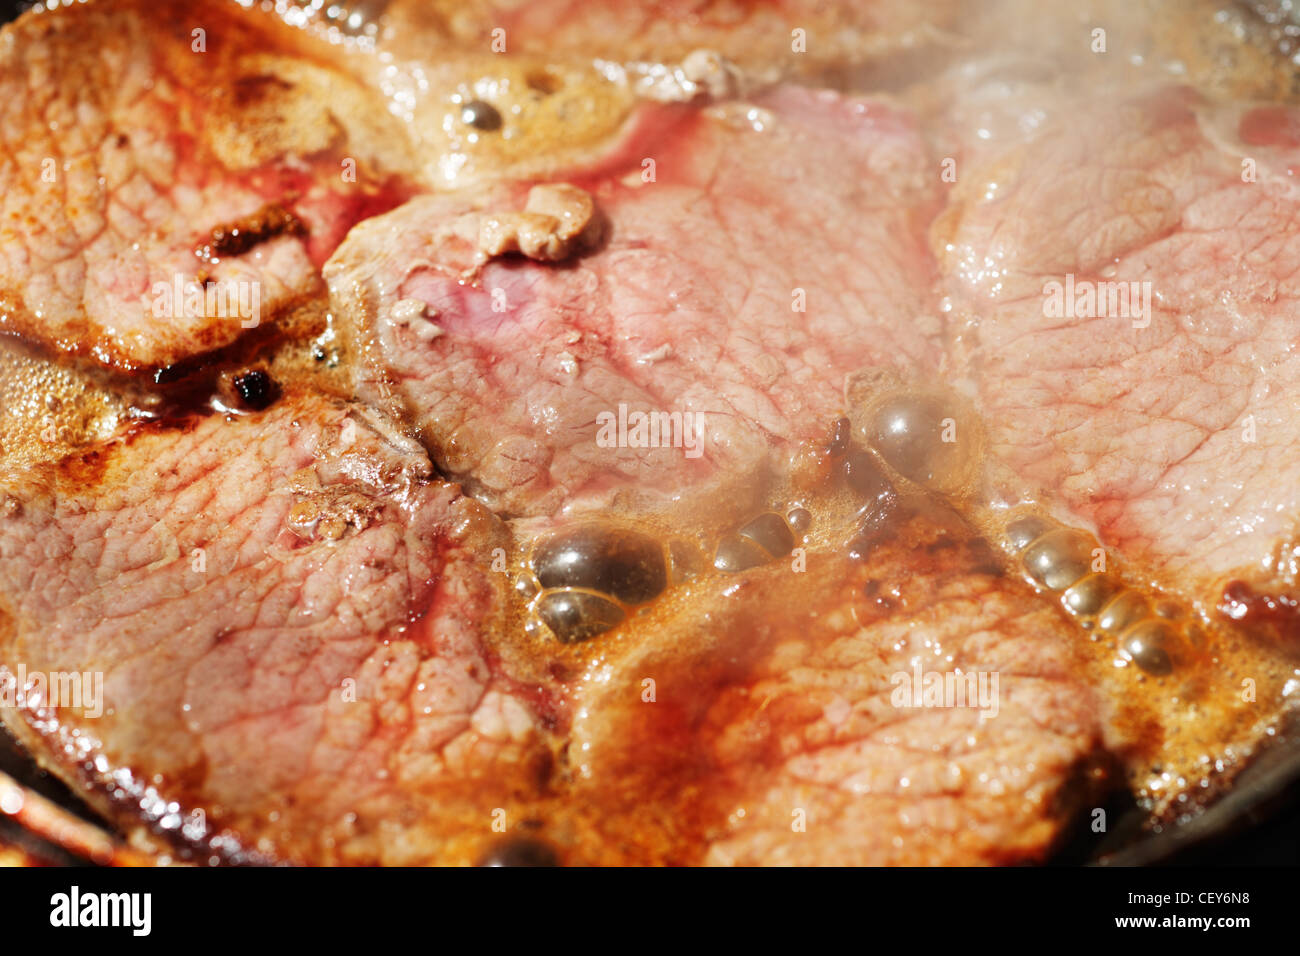 Fryed veal fillet in a frying pan Stock Photo